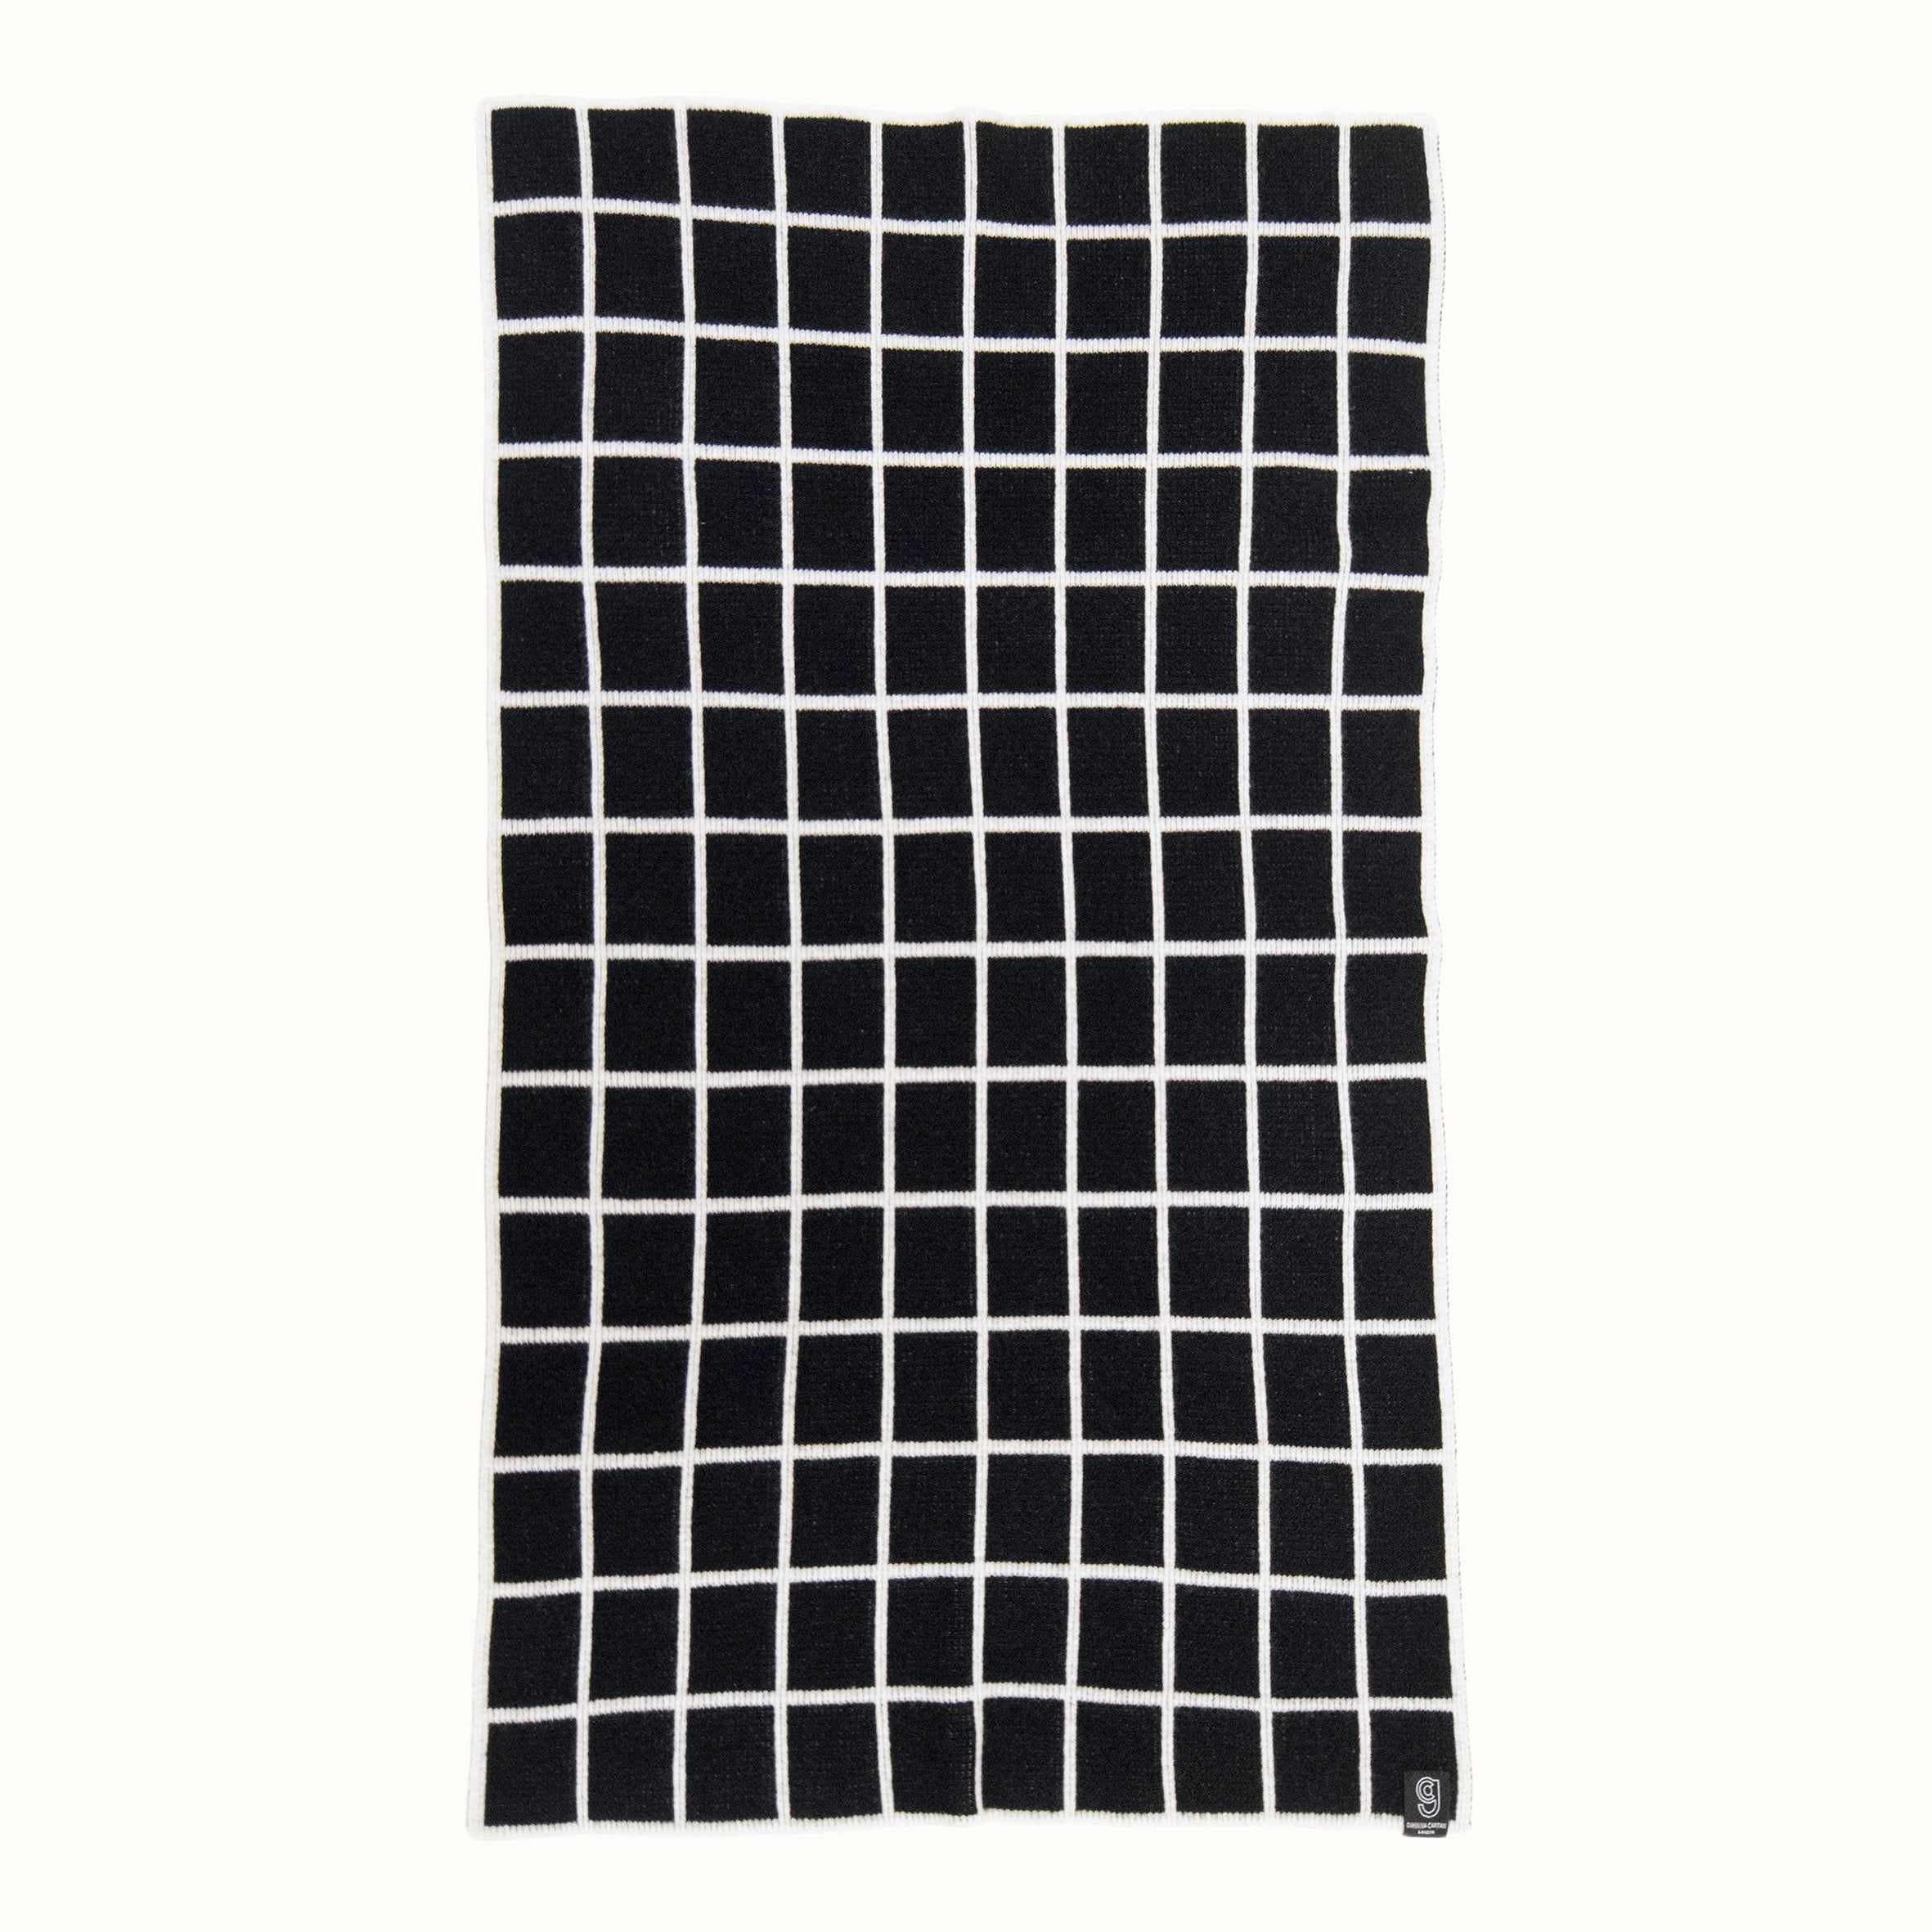 GRID BABY BLANKET IN BLACK AND WHITE